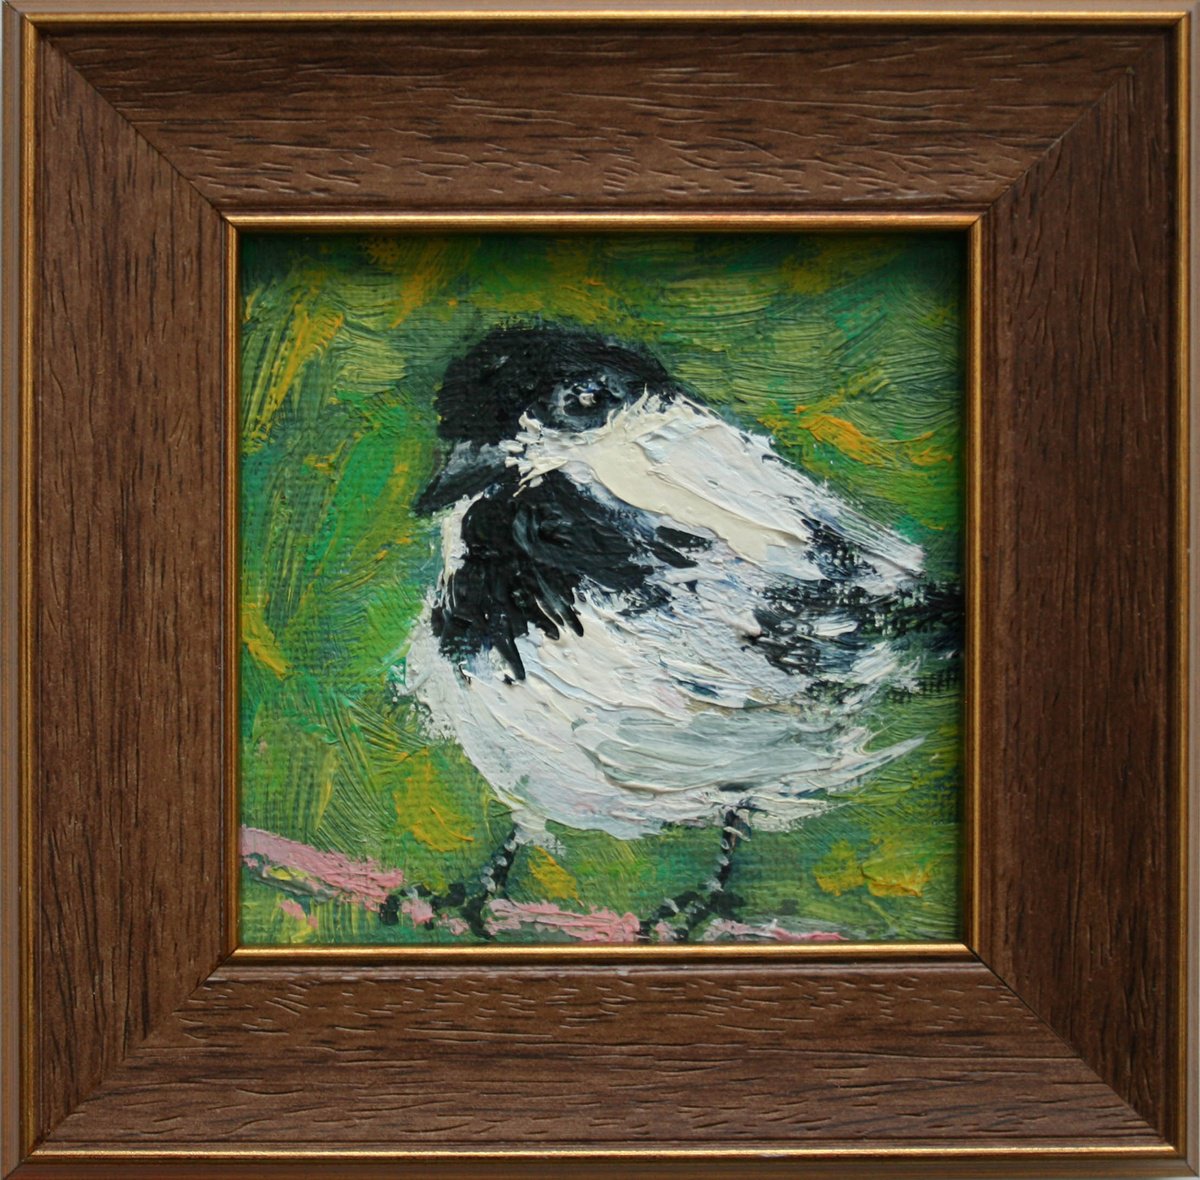 BIRD #4 framed / FROM MY A SERIES OF MINI WORKS BIRDS / ORIGINAL PAINTING by Salana Art Gallery